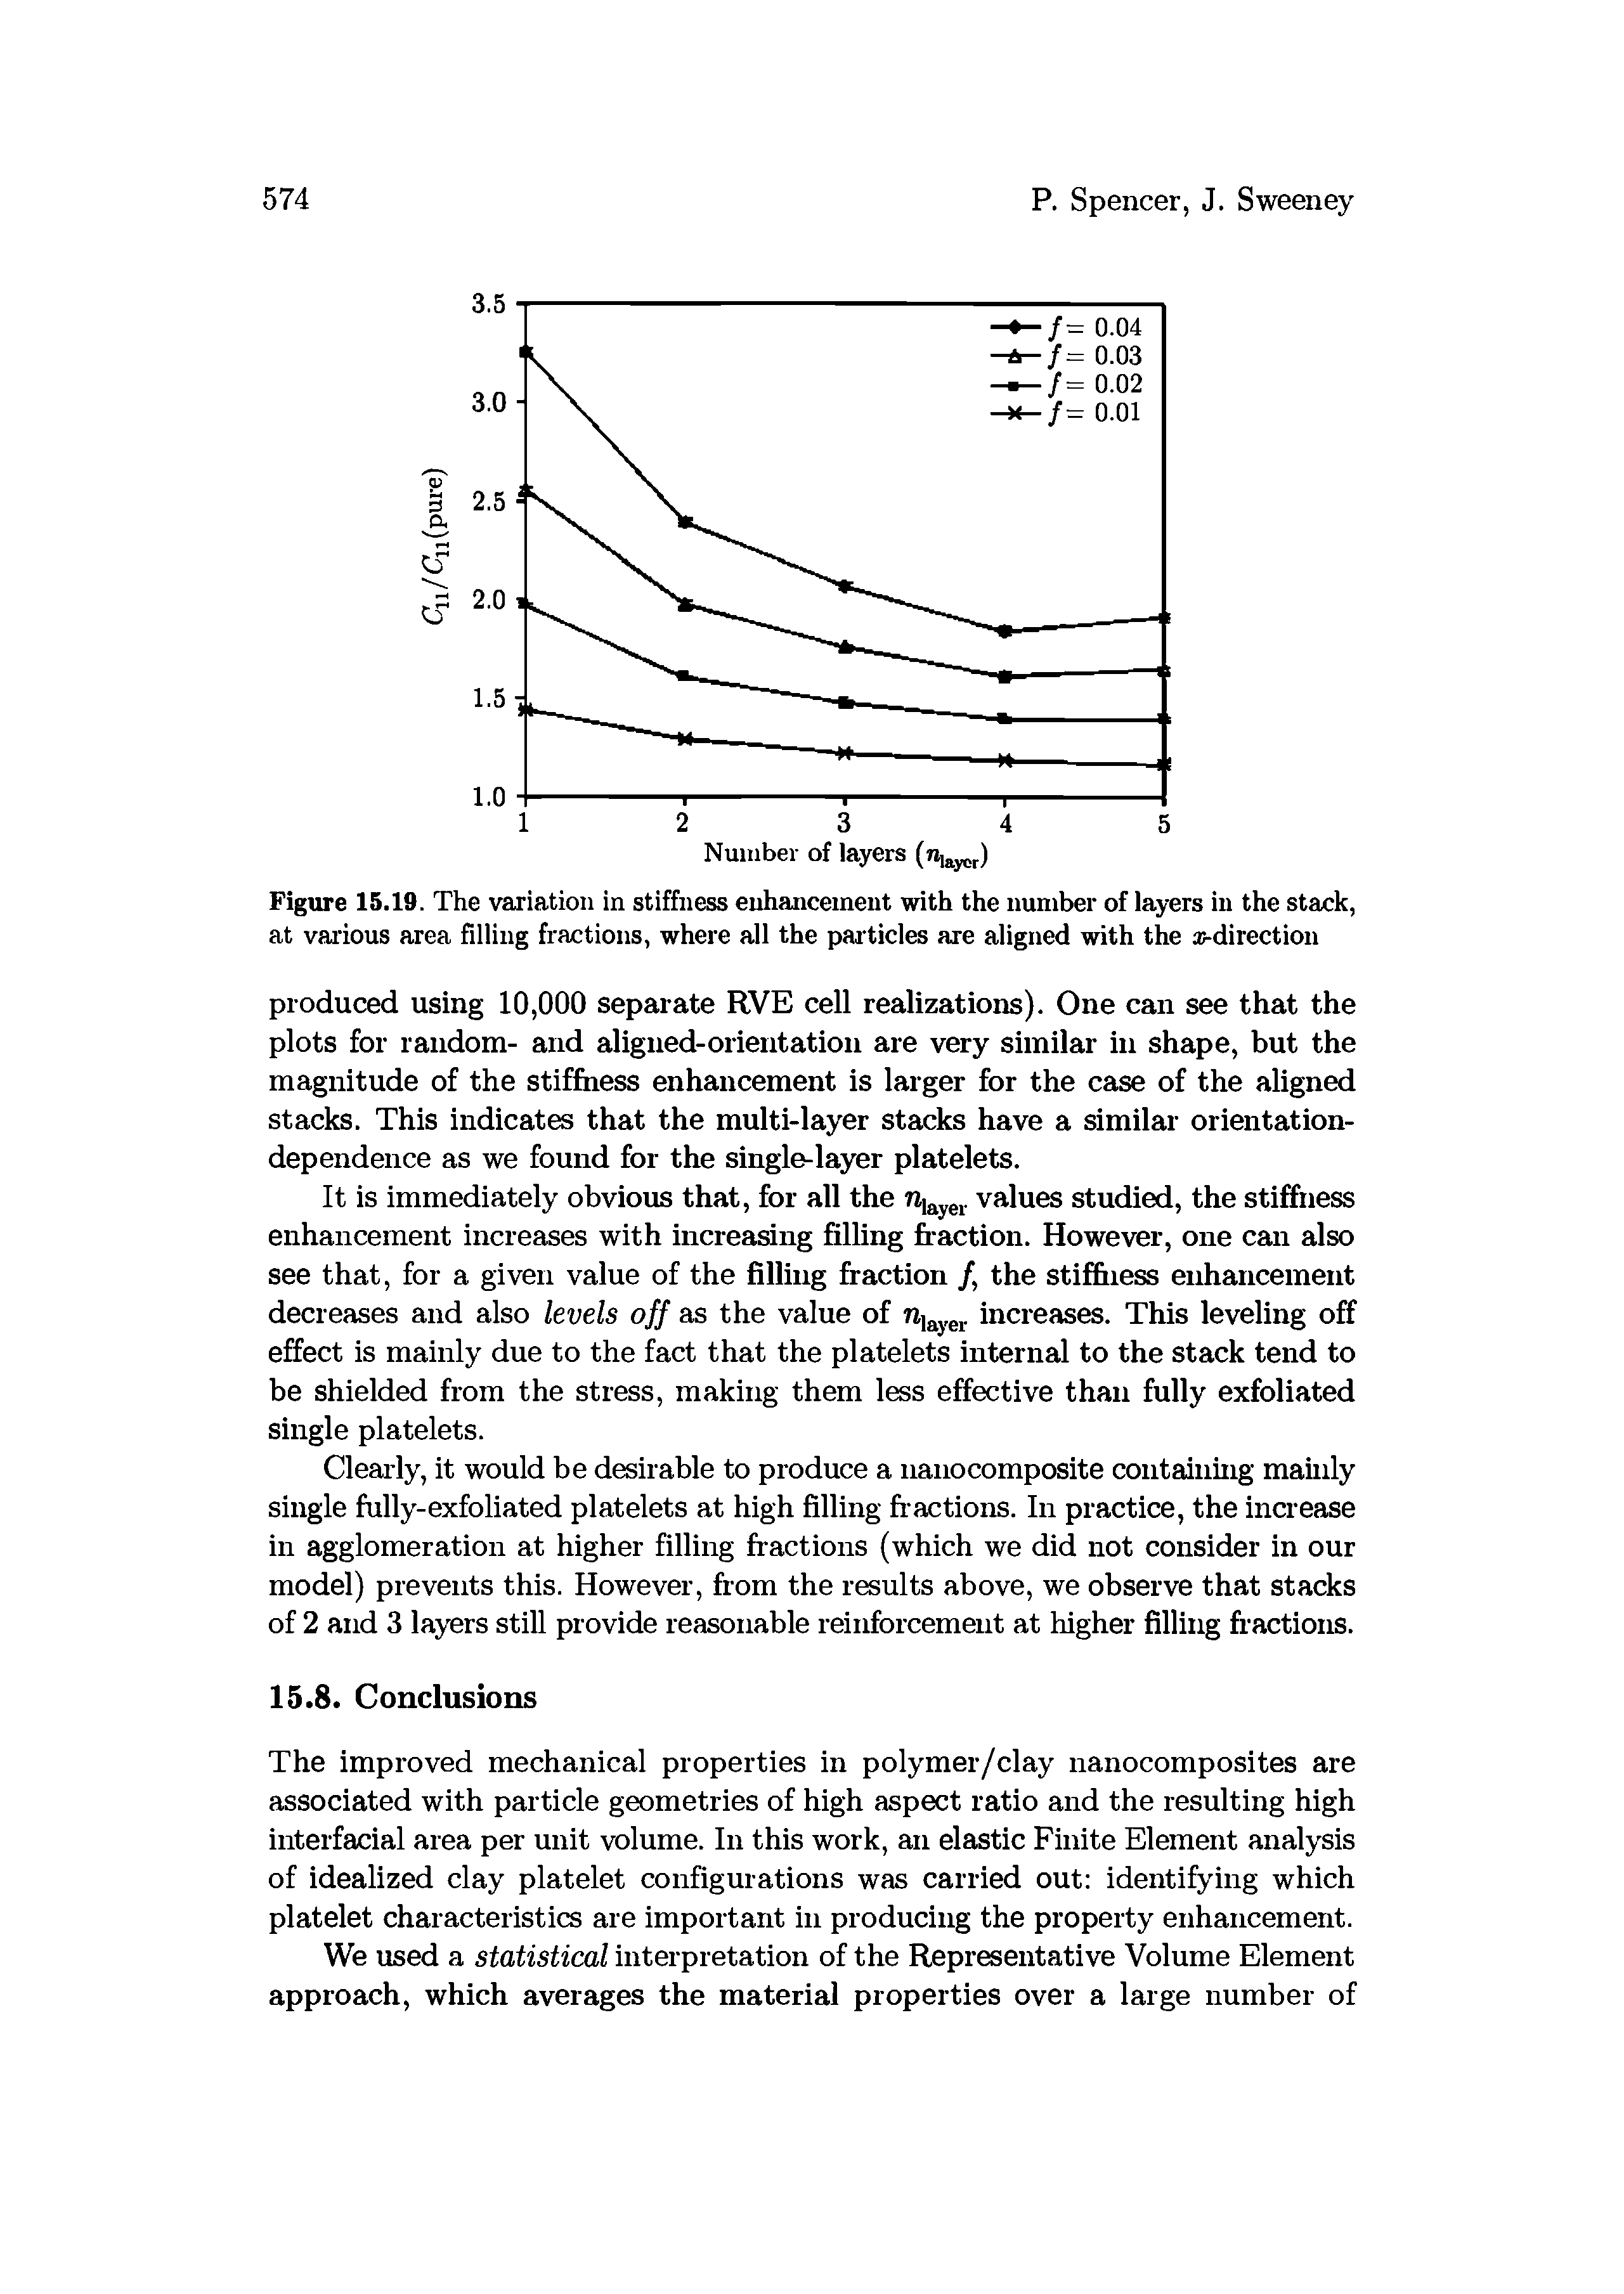 Figure 15.19. The variation in stiffness enhancement with the number of layers in the stack, at various area filling fractions, where all the particles are aligned with the -direction...